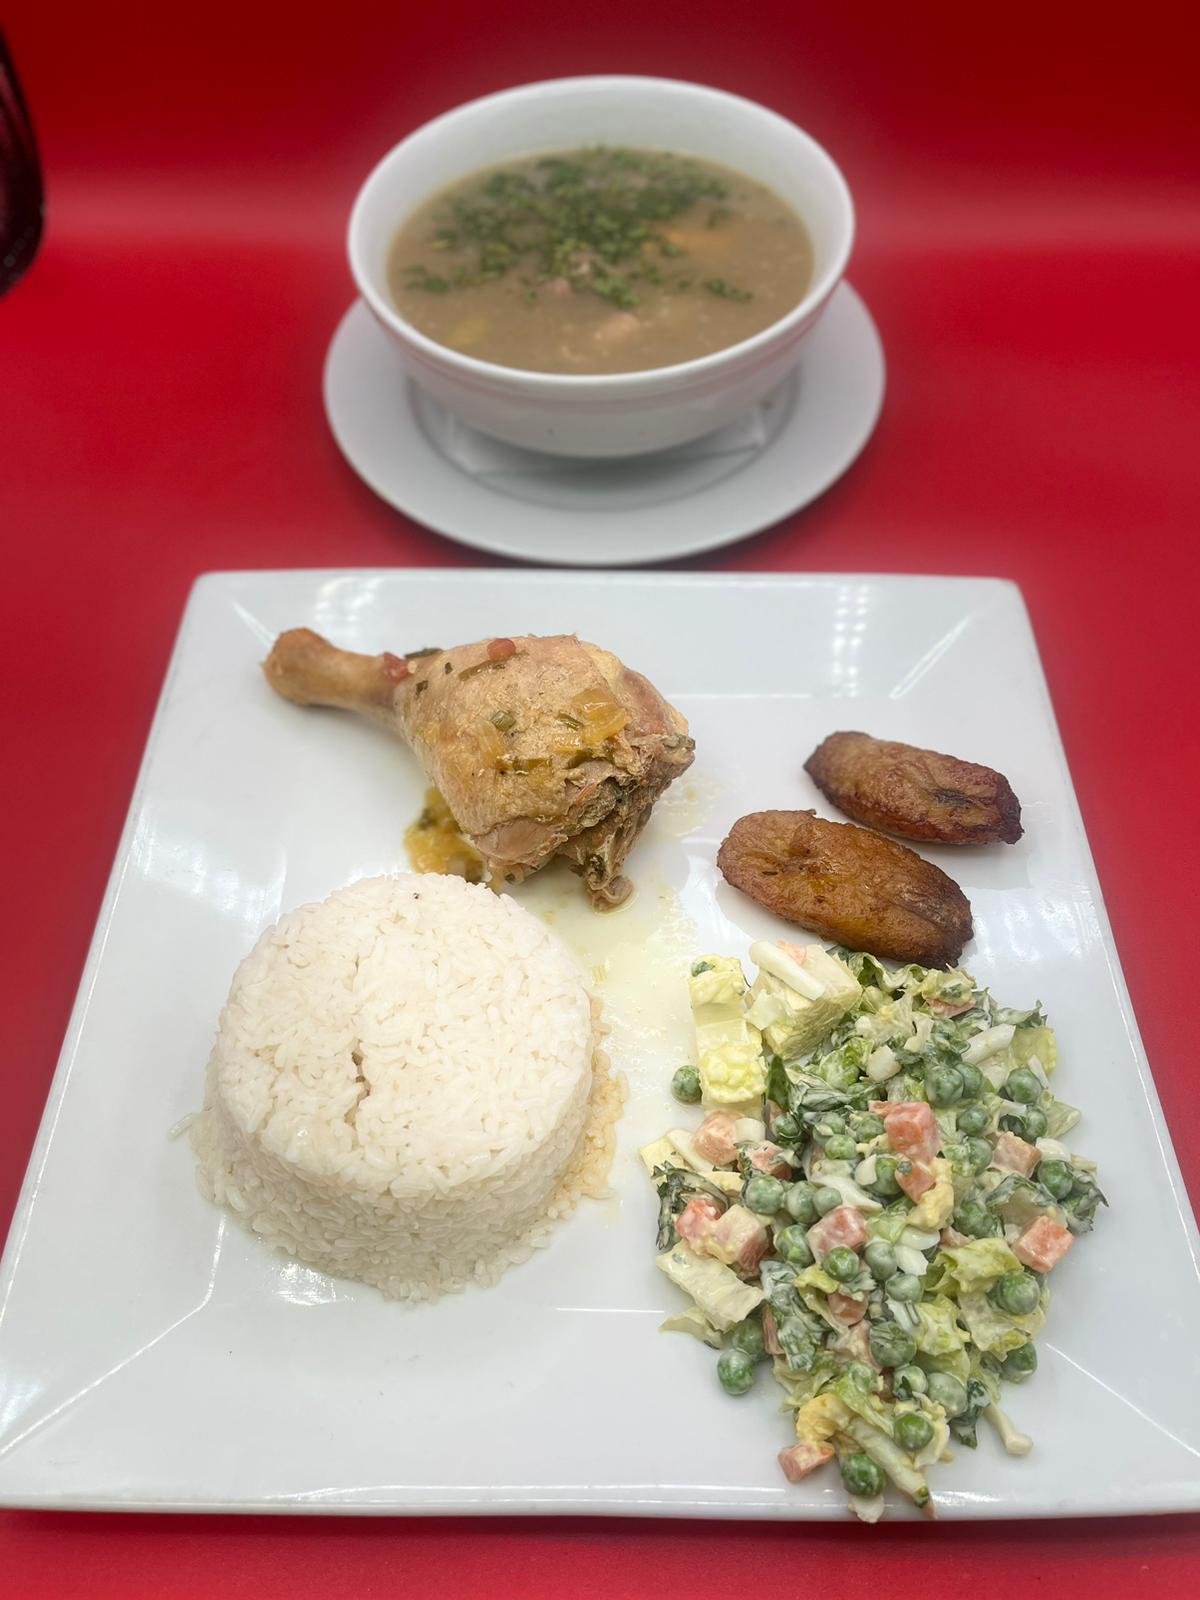 A plate of rice, chicken and soup on a red plate.